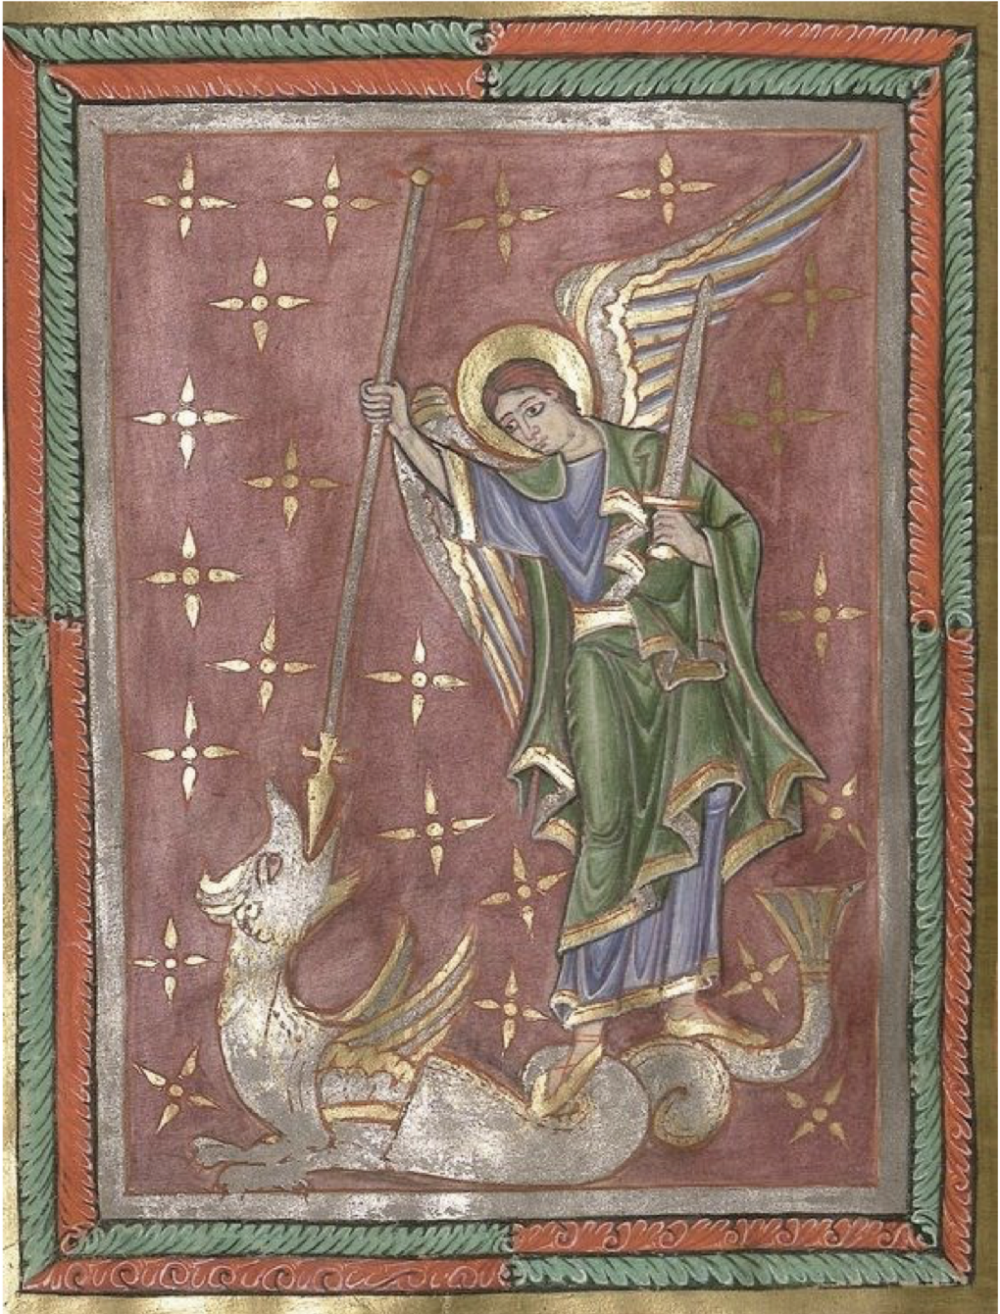 The Feast of St. Michael and All Angels Image